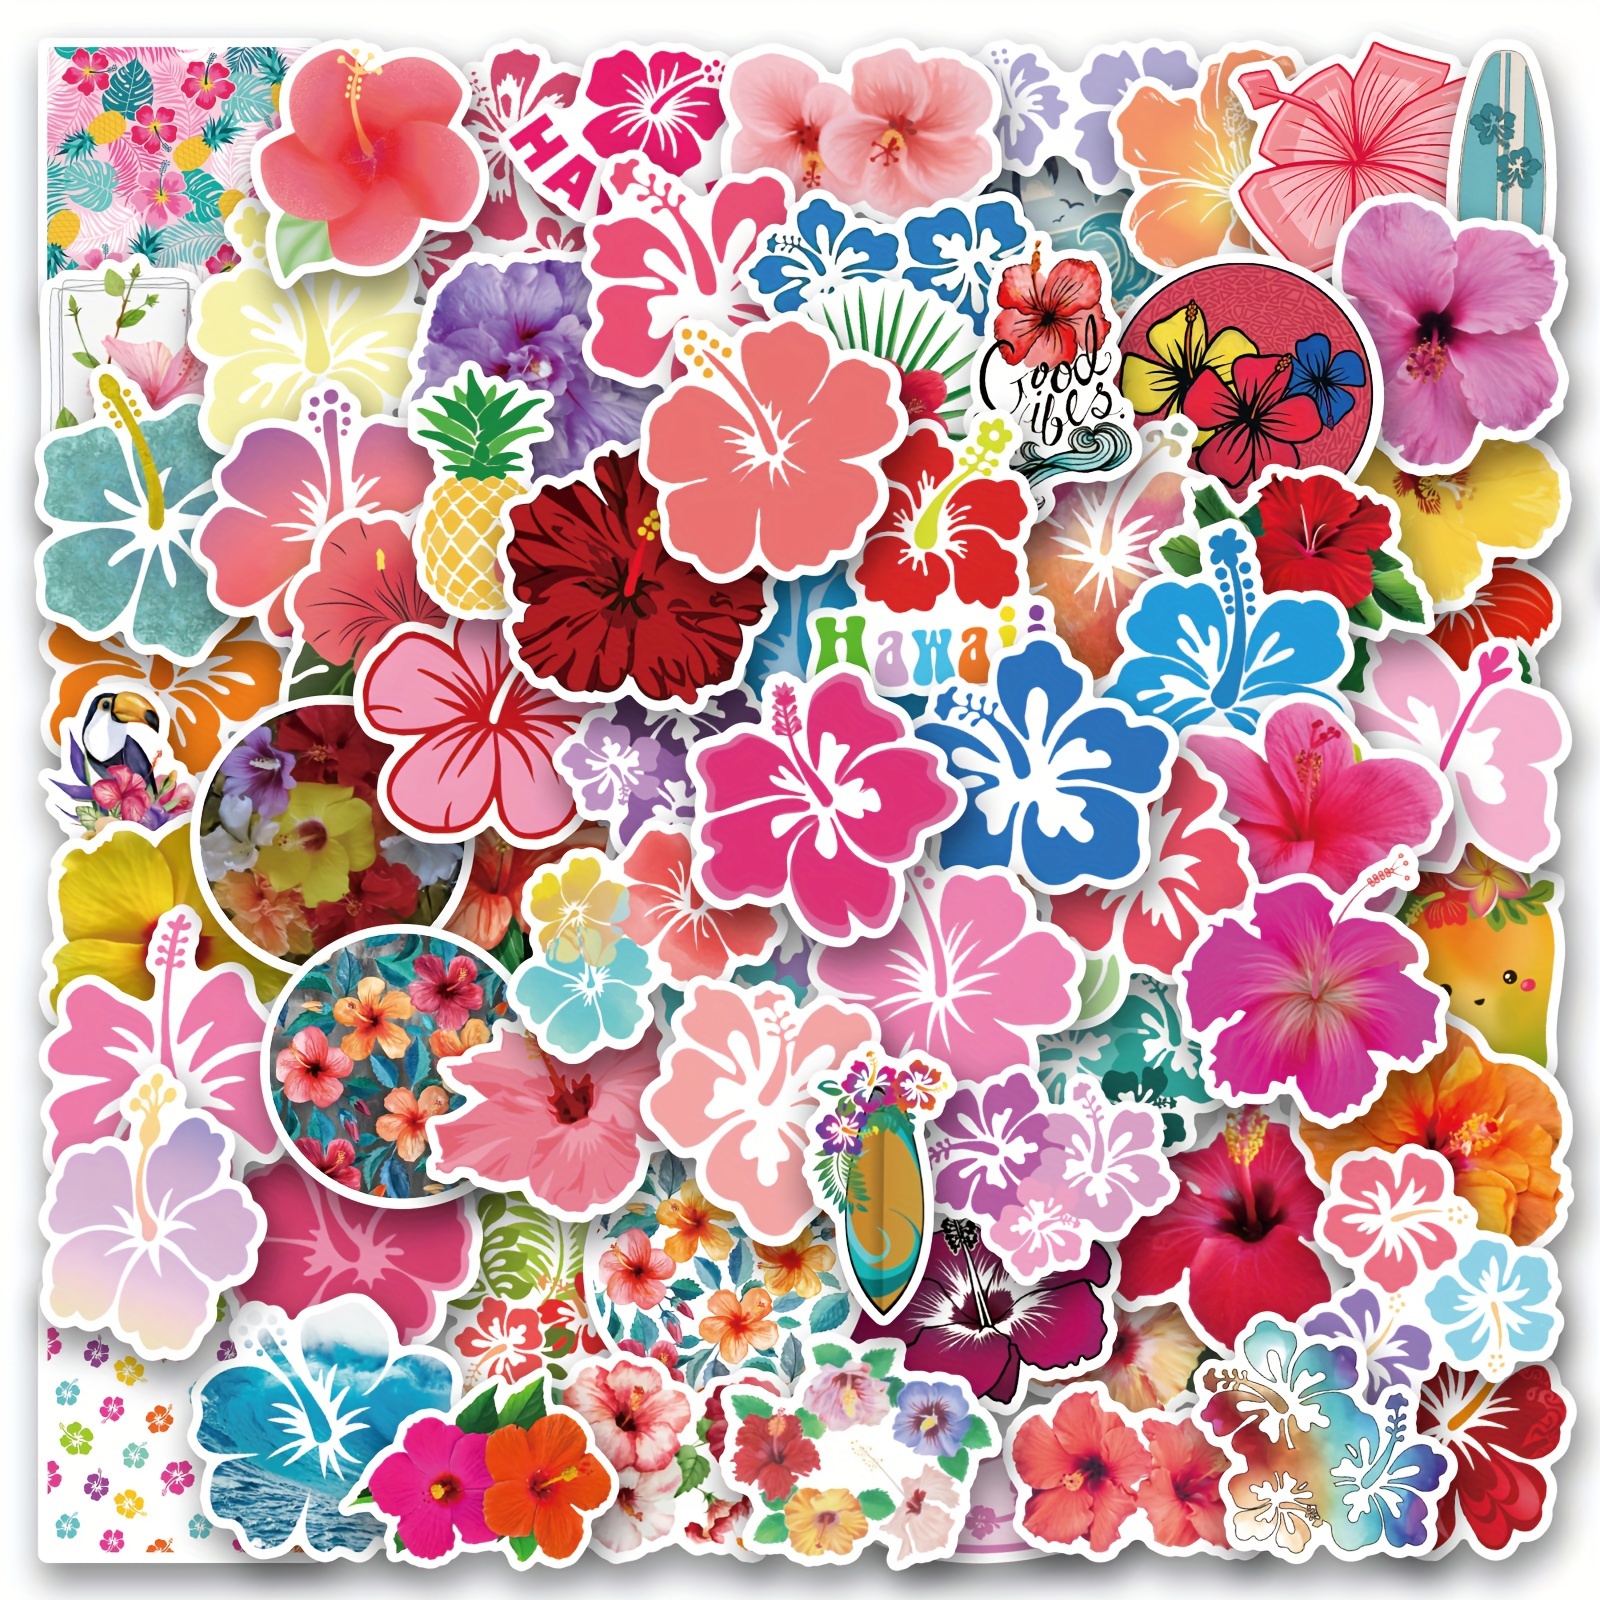 100pcs Flower Stickers Pack for Water Bottle, Cute, Vinyl, Aesthetic,  Trendy, Waterproof Floral Stickers and Decals for Hydroflask Laptop  Scrapbooking